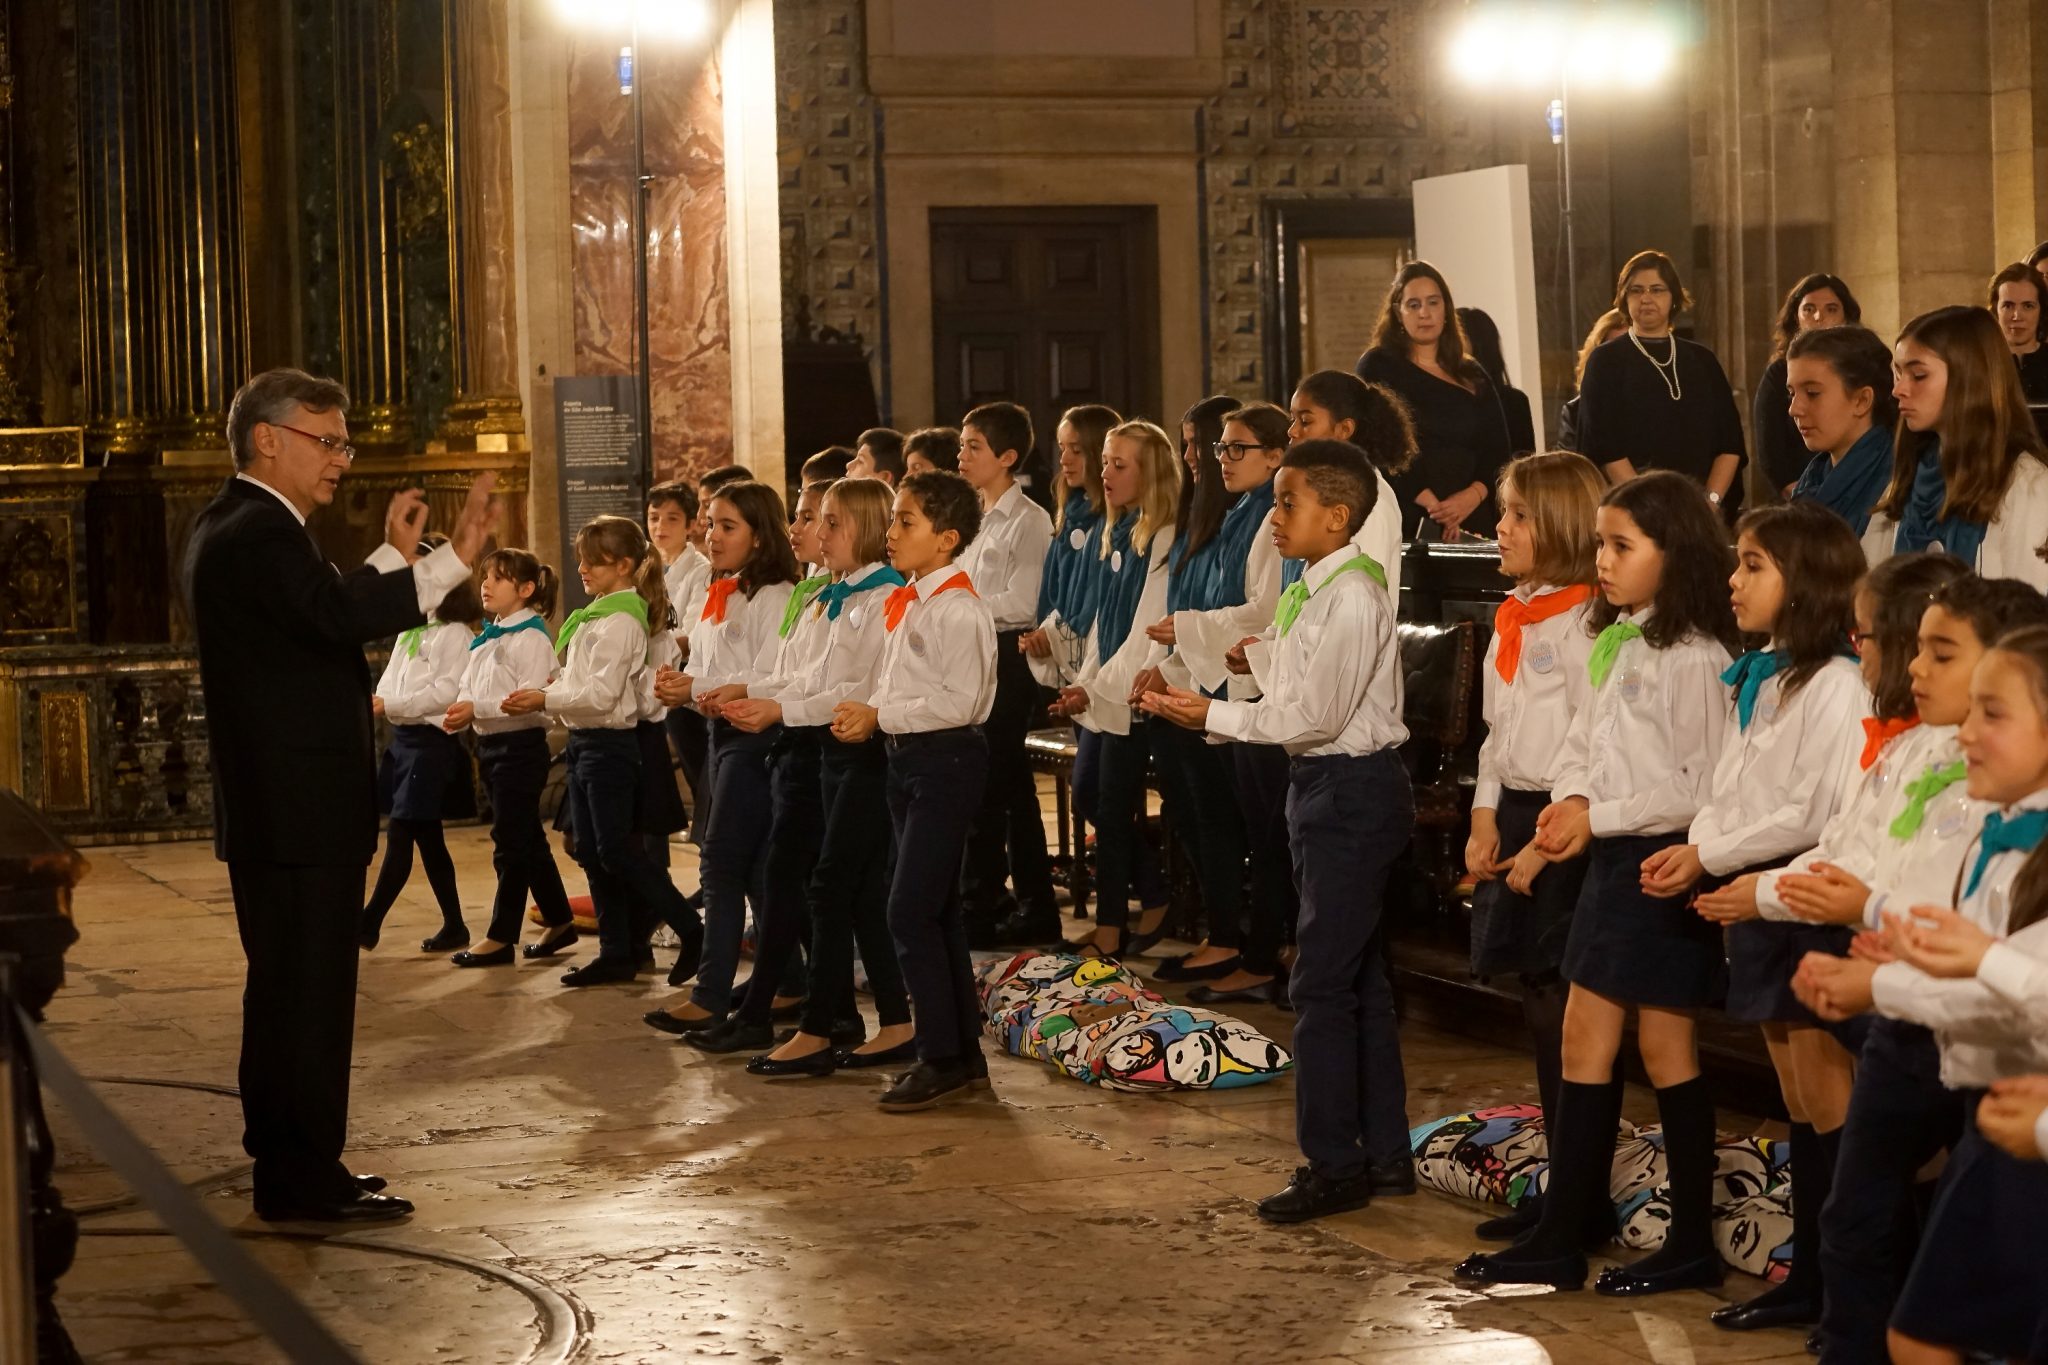 Several children, sideways to the viewer, wearing white shirts and colorful scarves around their necks, sing in front of the conductor (left of image)